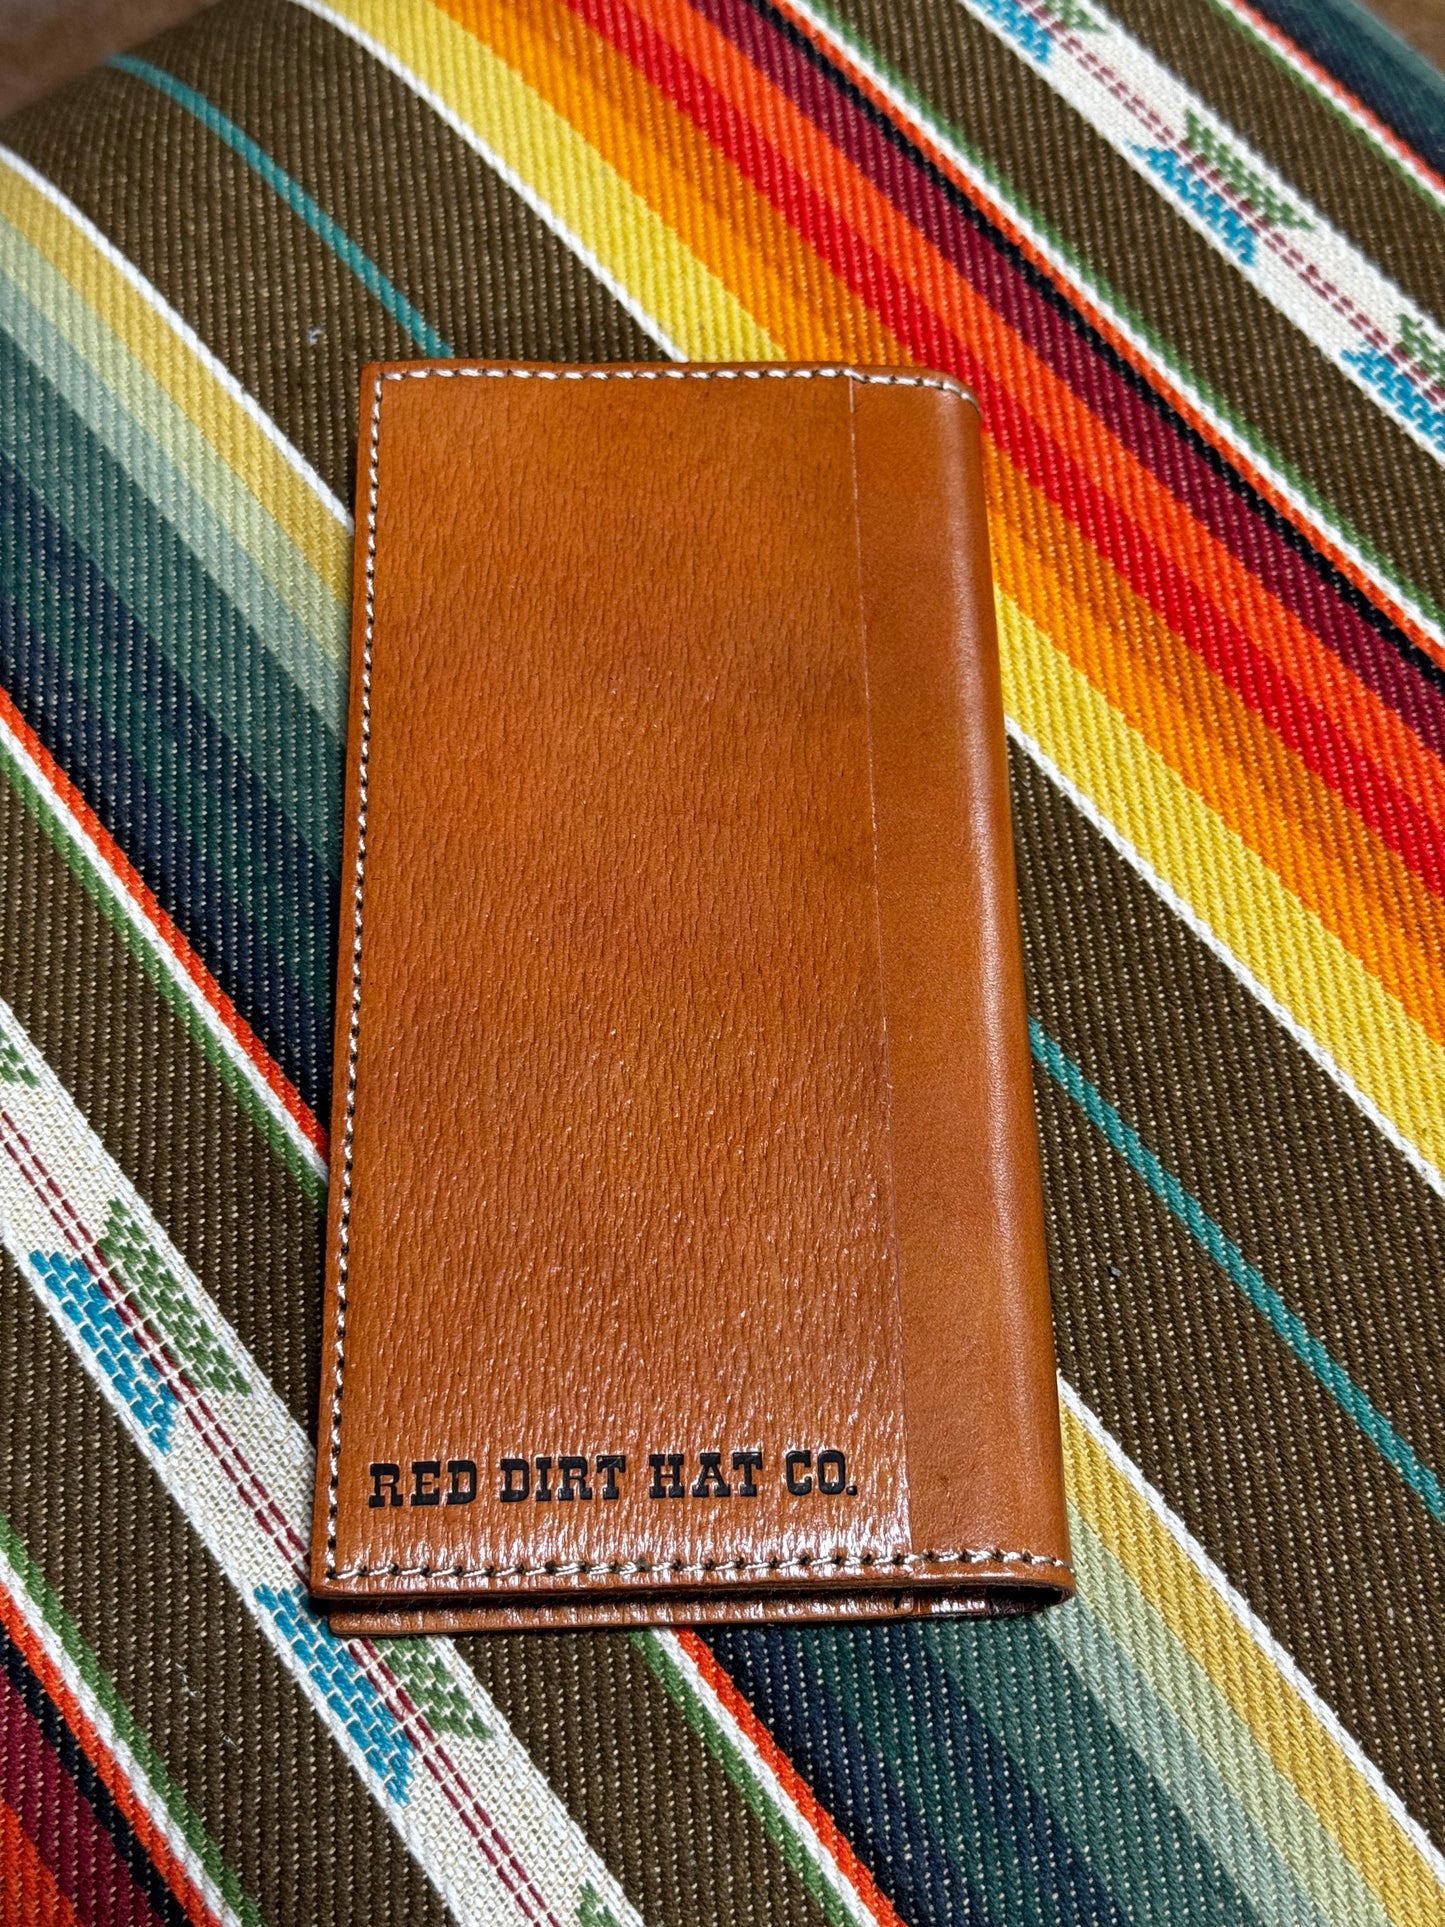 Red Dirt Hat Tooled with White Inlay Rodeo Wallet(76w3)